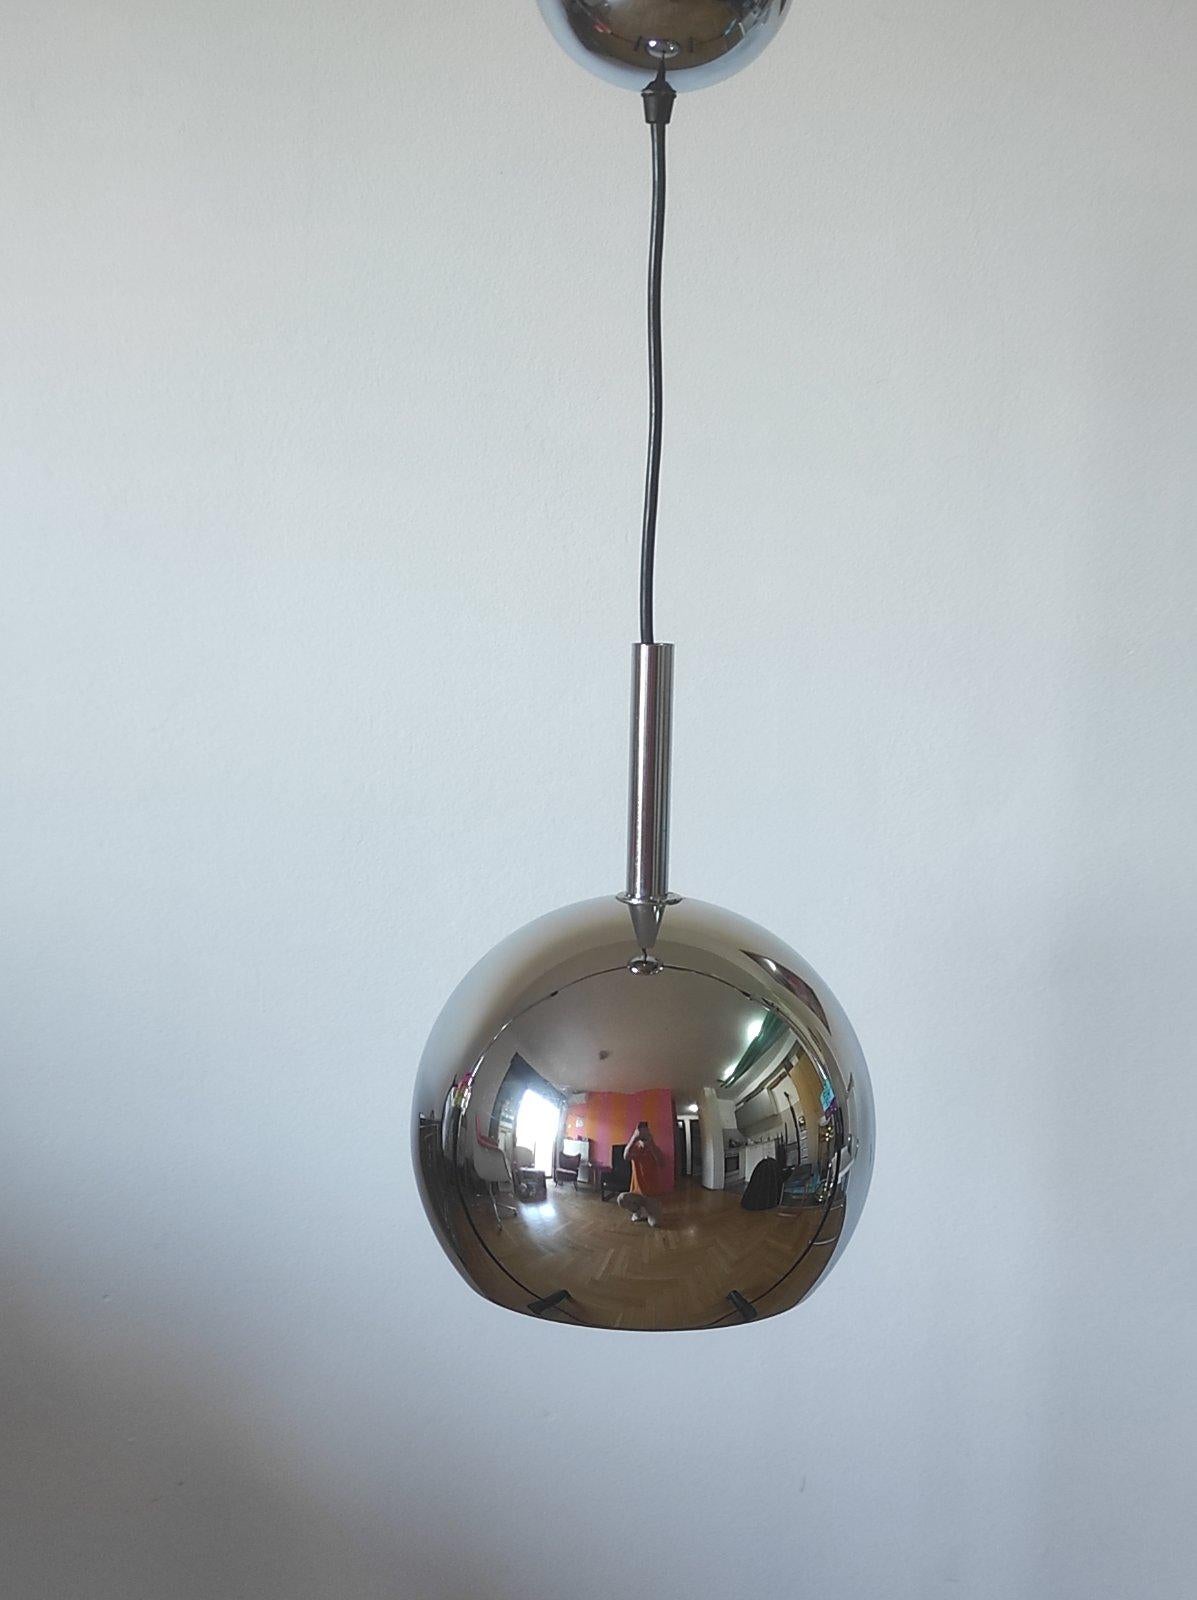 One of Two Space Age Chrome Ball Pendant By Guzzini Italy 1970s For Sale 2